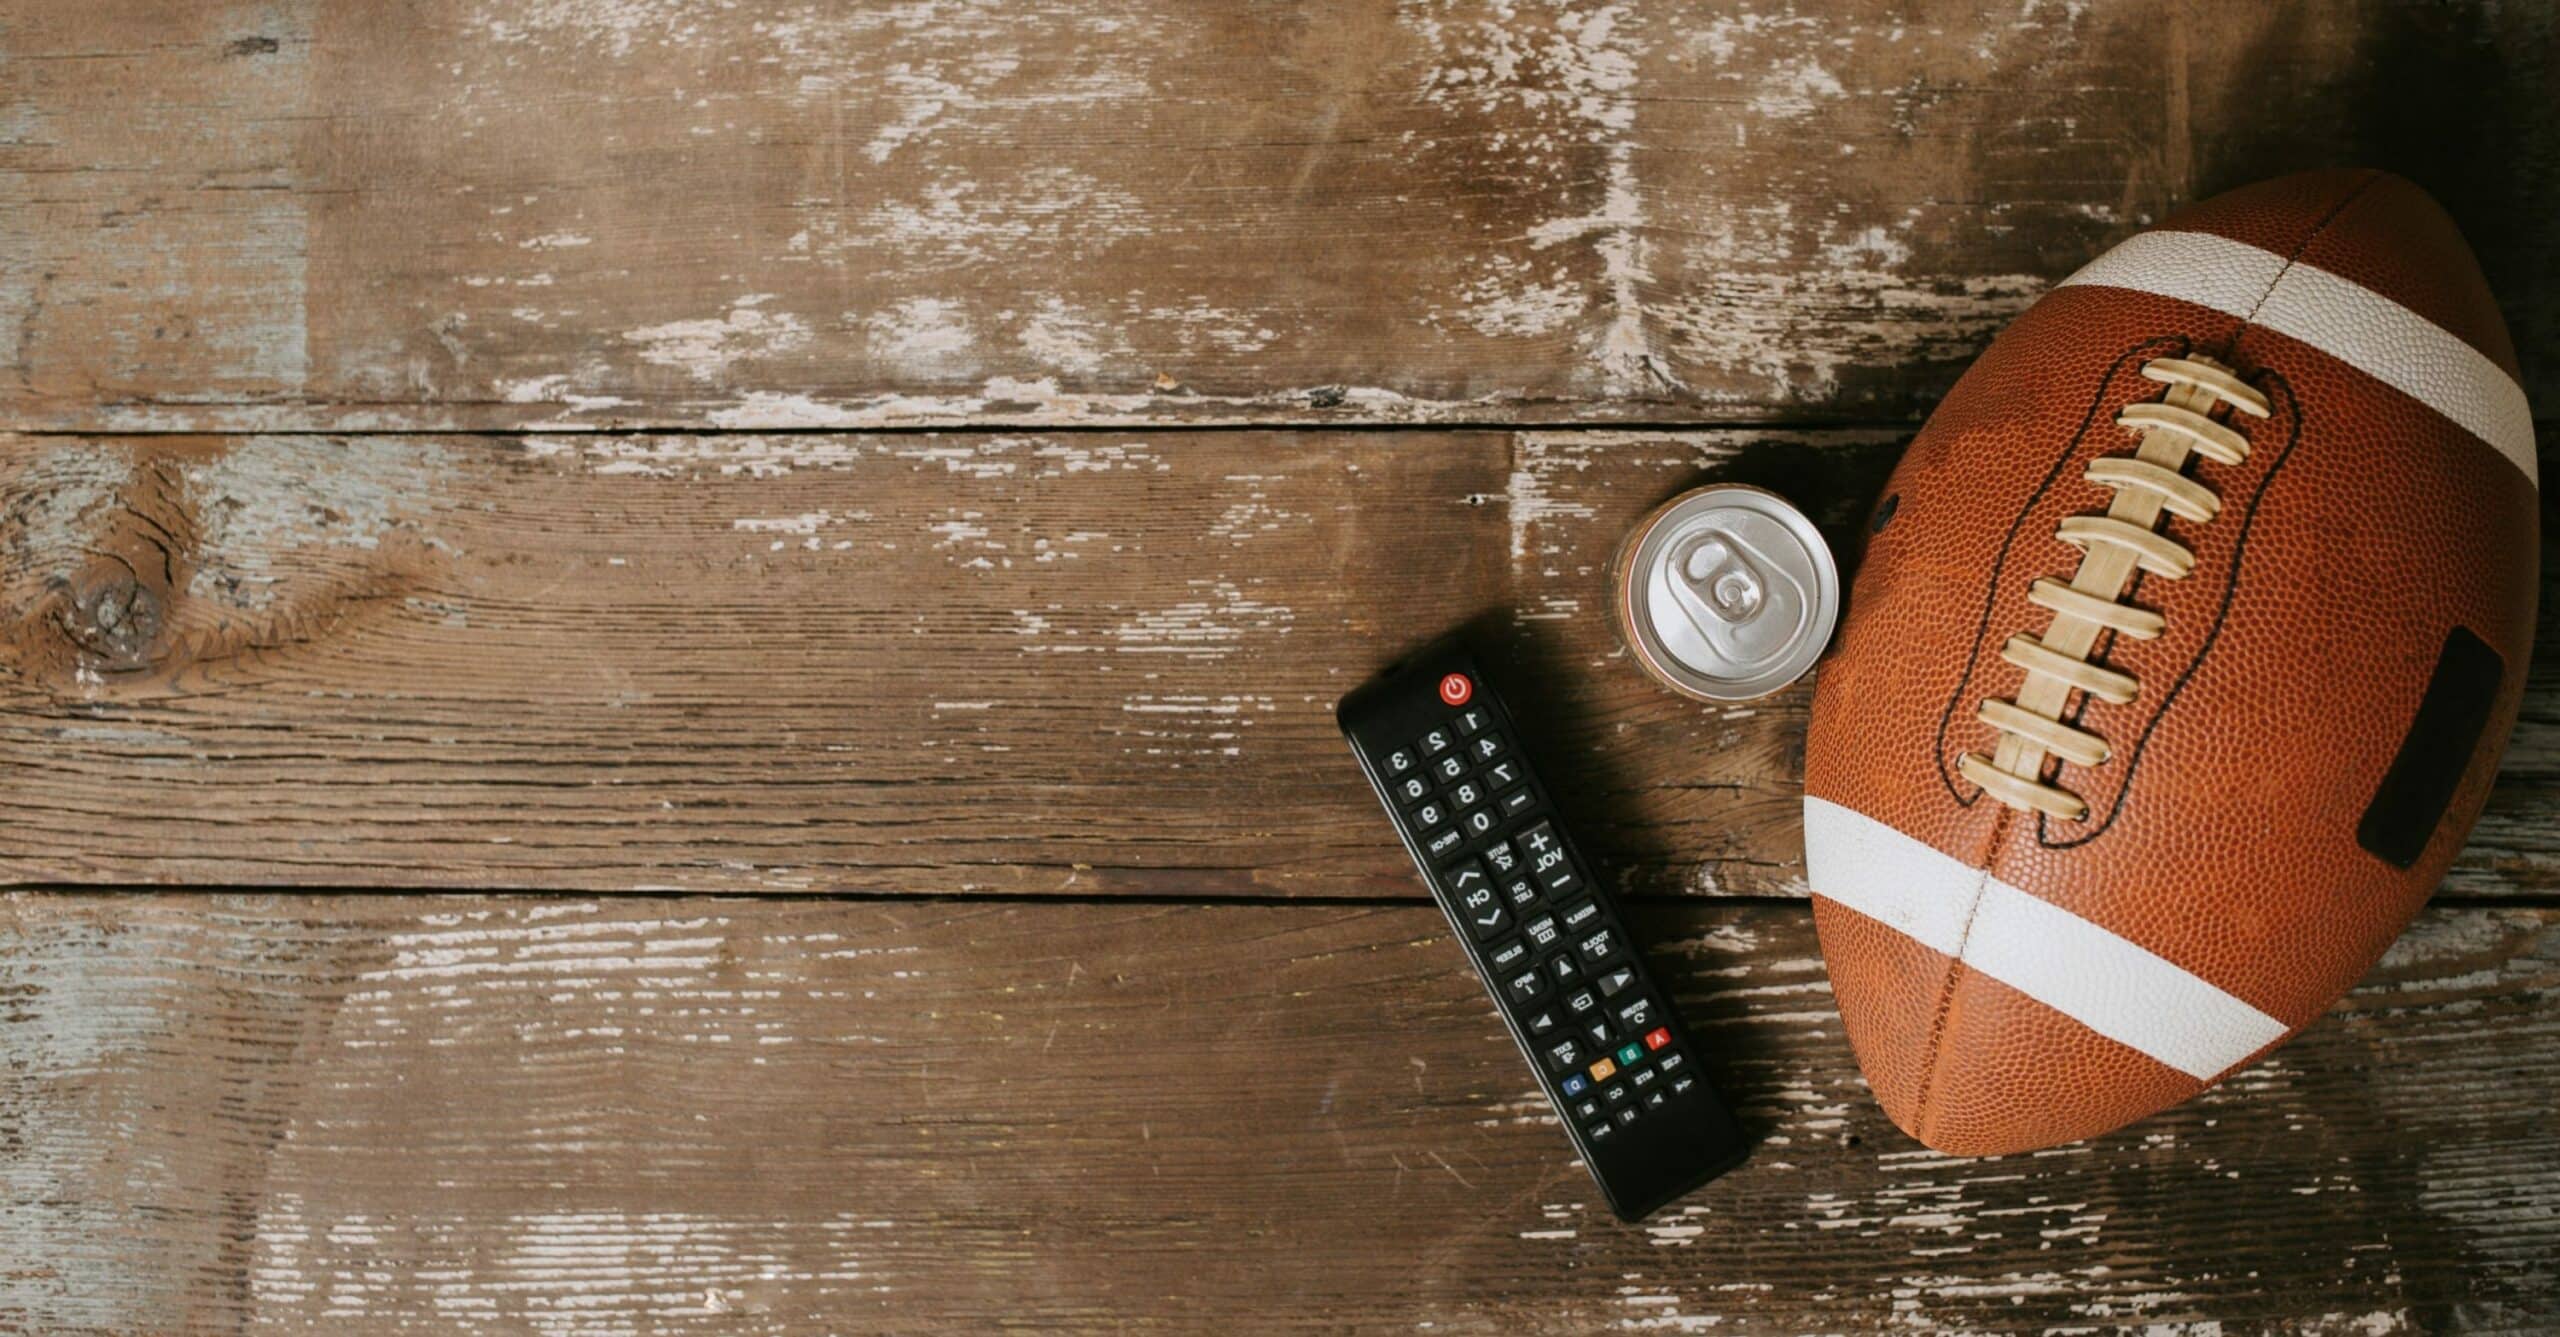 Football with a remote to watch big game parties in Las Vegas